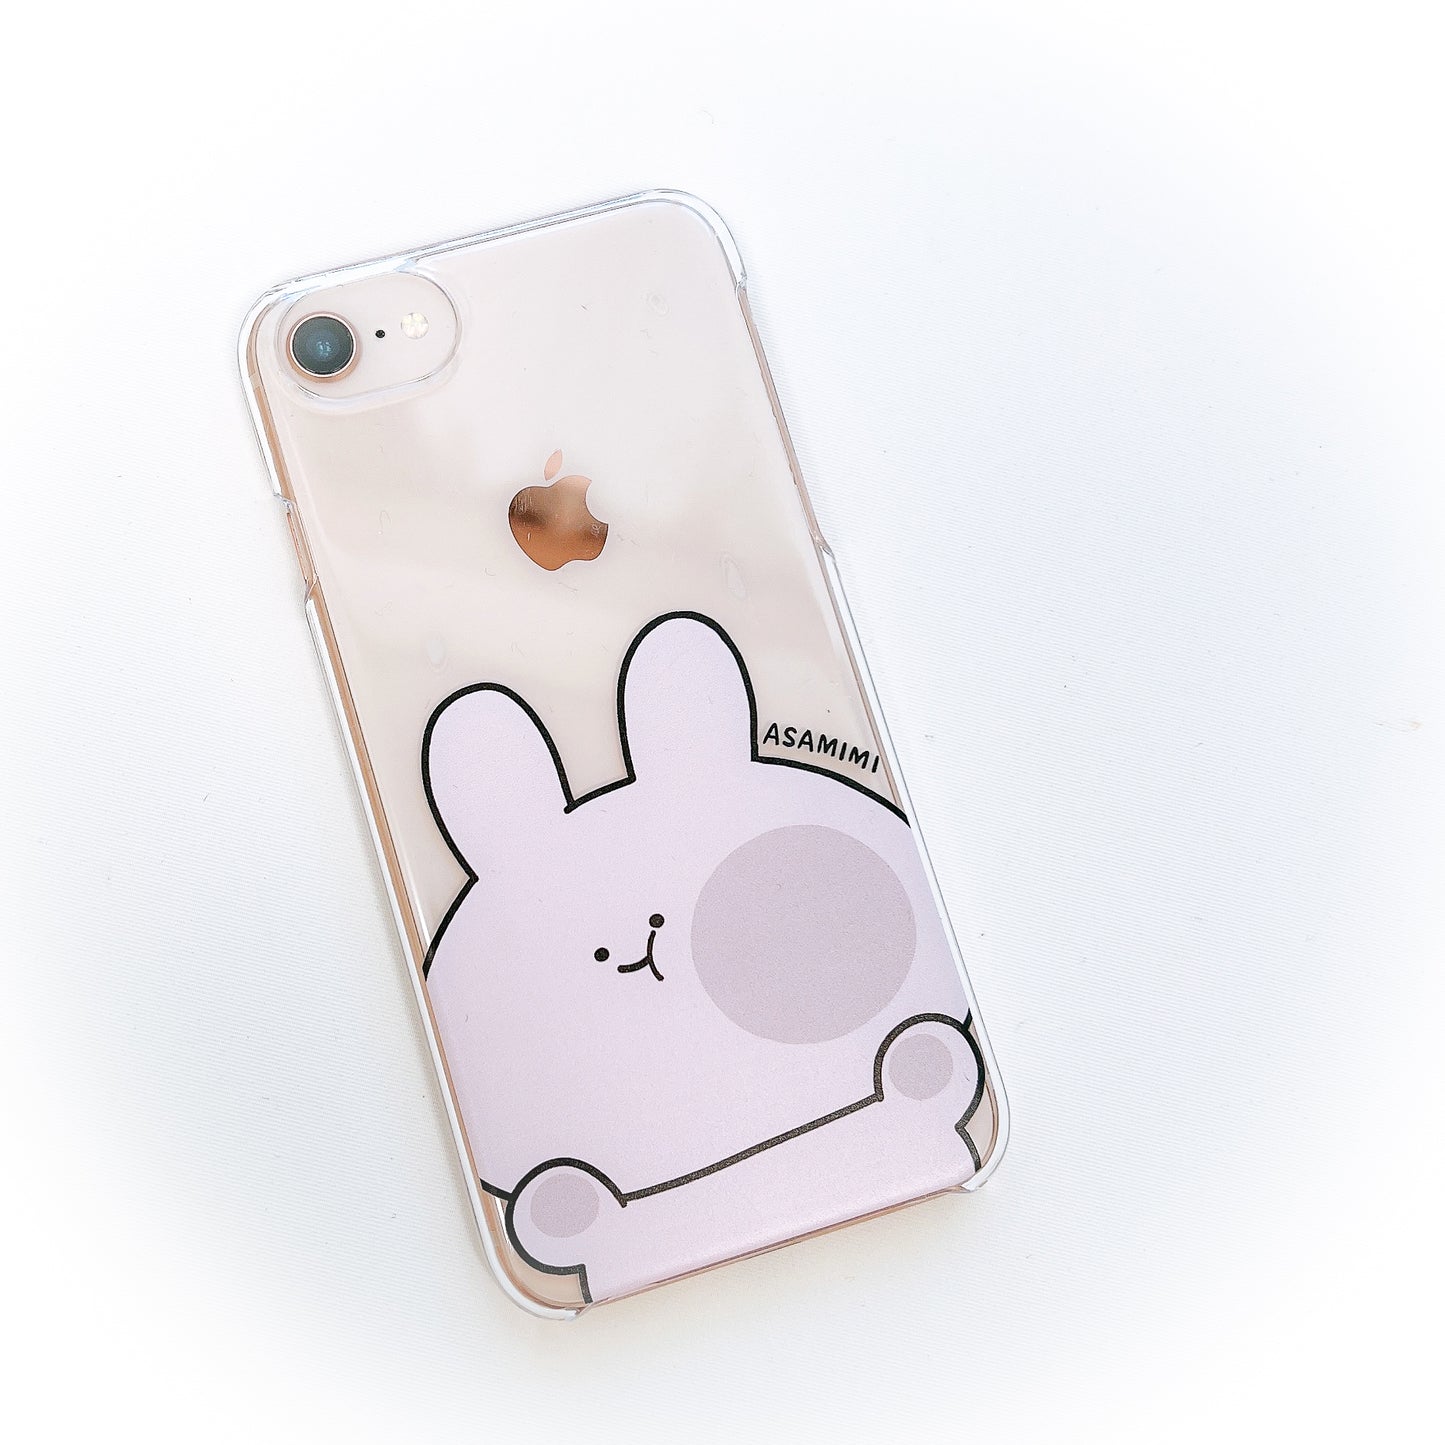 [Asamimi-chan] Smartphone case compatible with almost all models (BASIC) [Made to order]